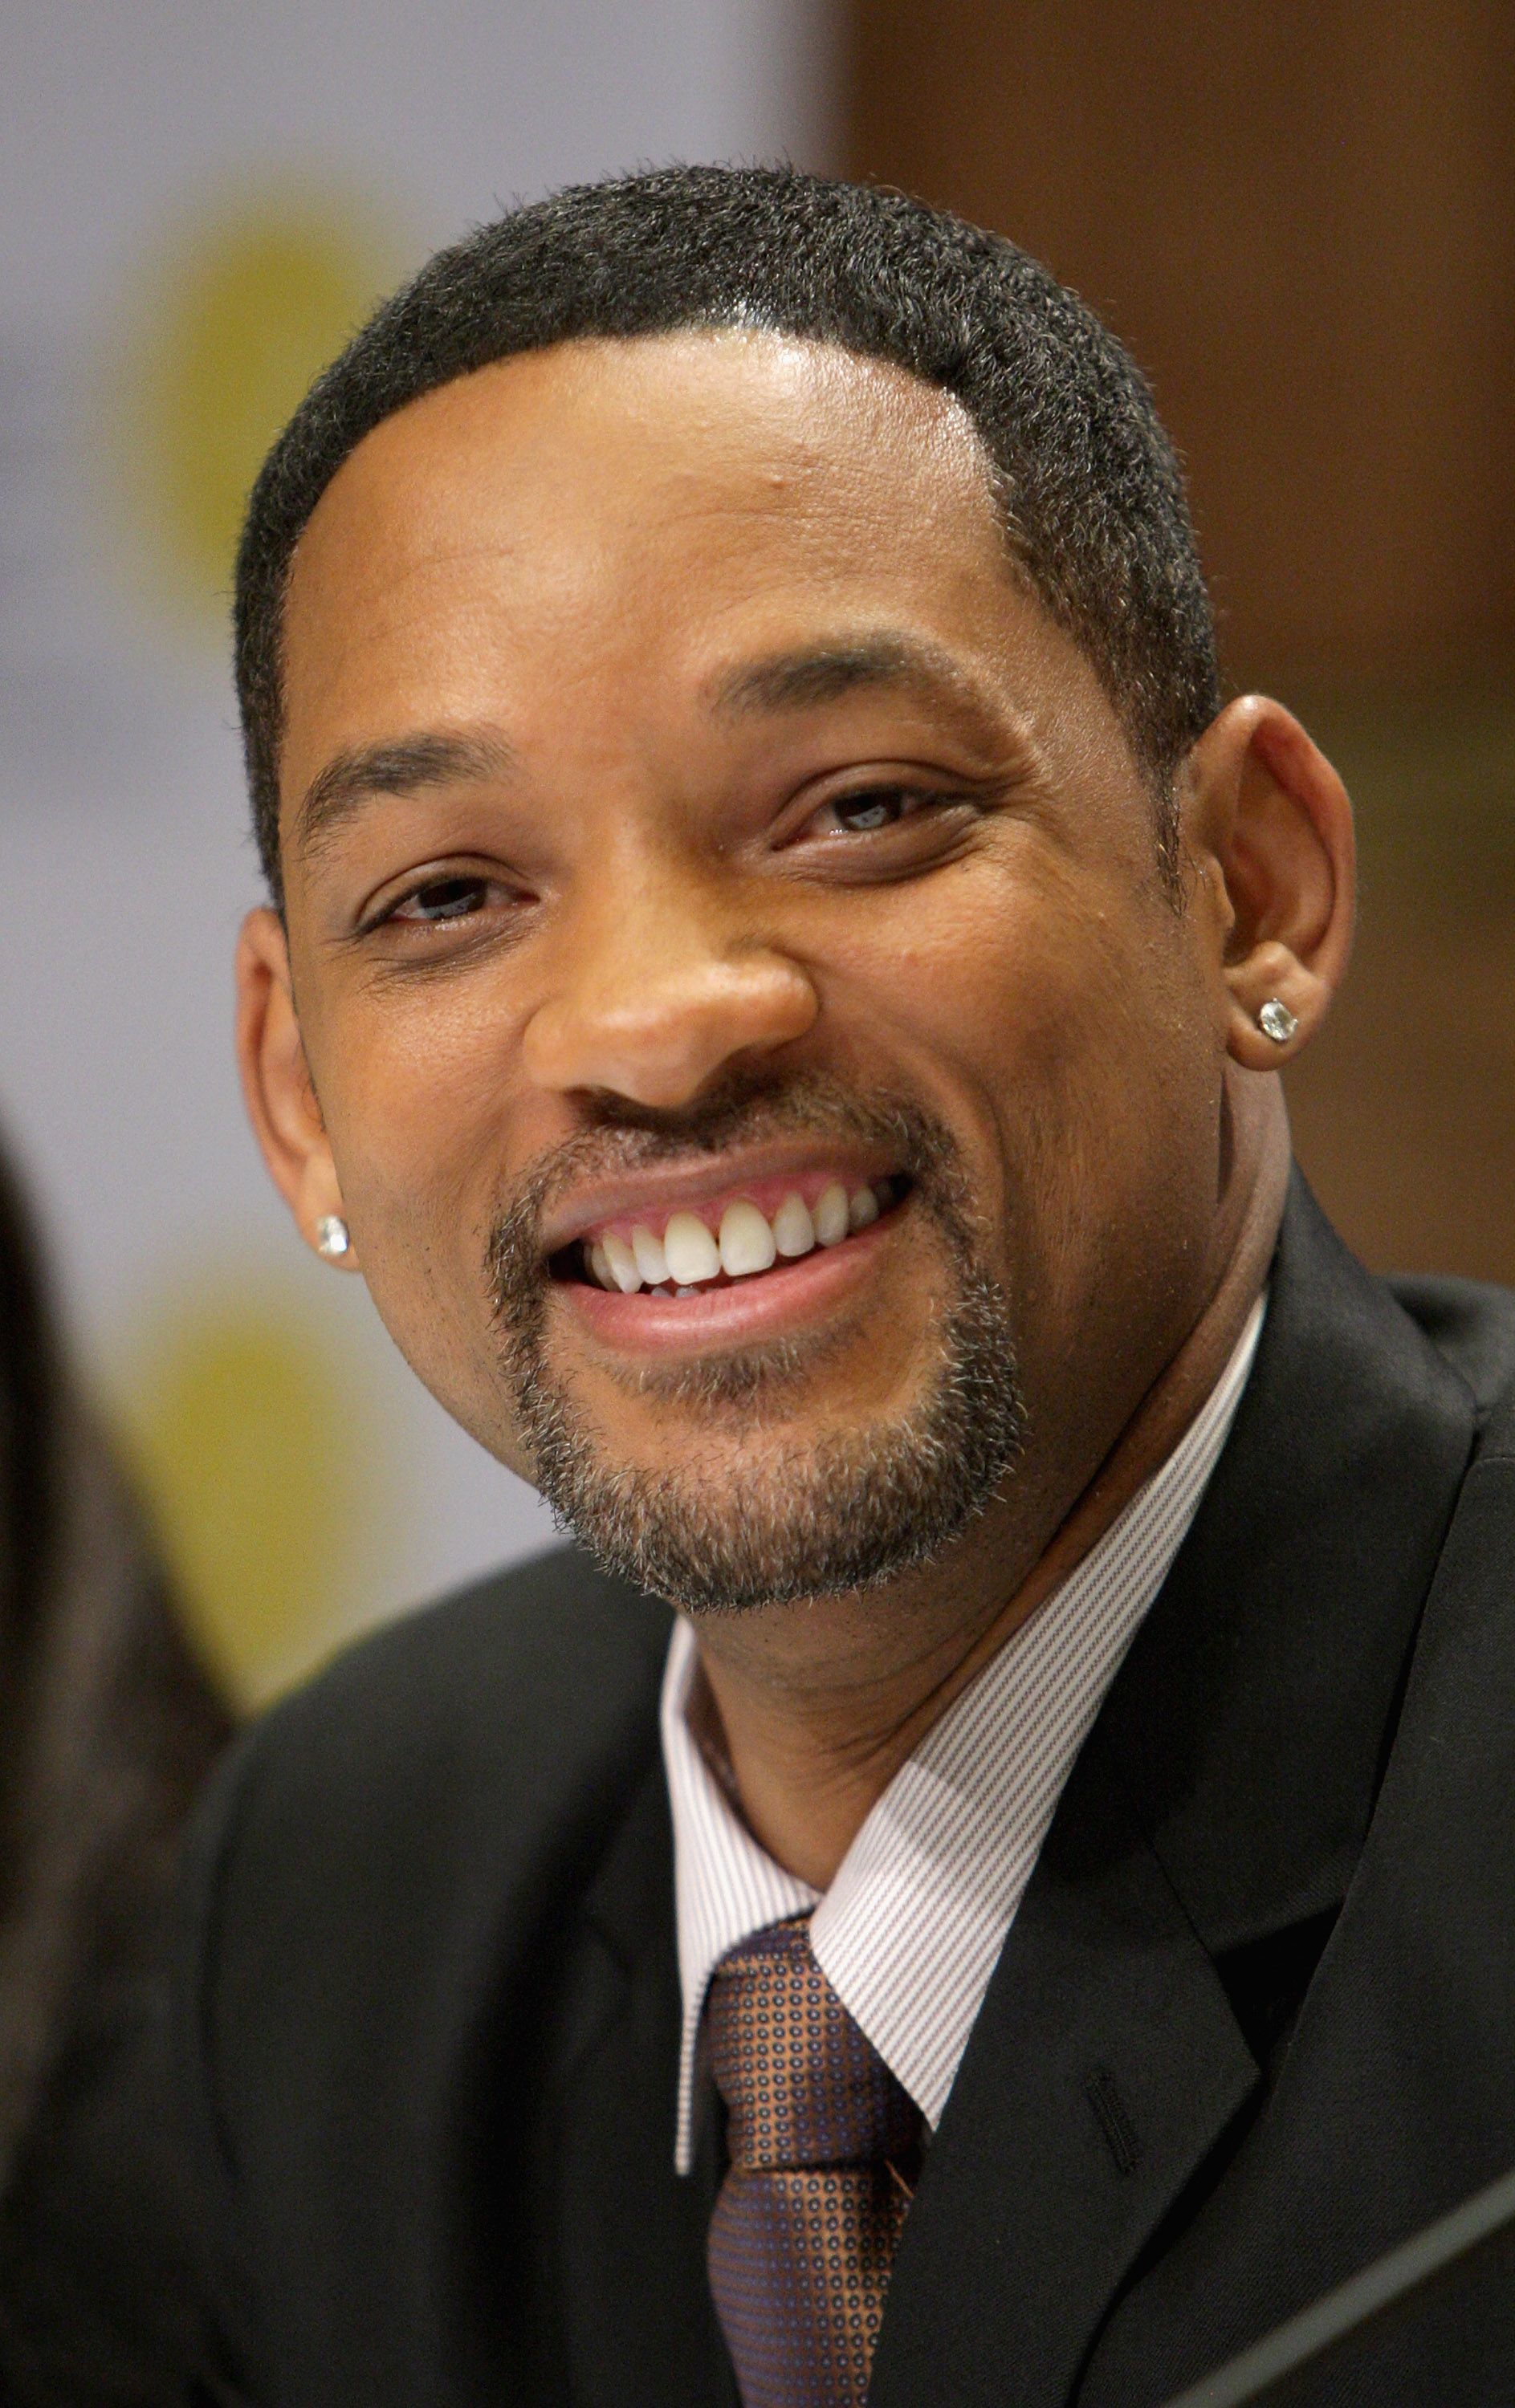 Actor Will Smith at a press conference for the Nobel Peace Prize Concert at the Radisson Hotel on December 11, 2009 in Oslo, Norway | Photo: Getty Images